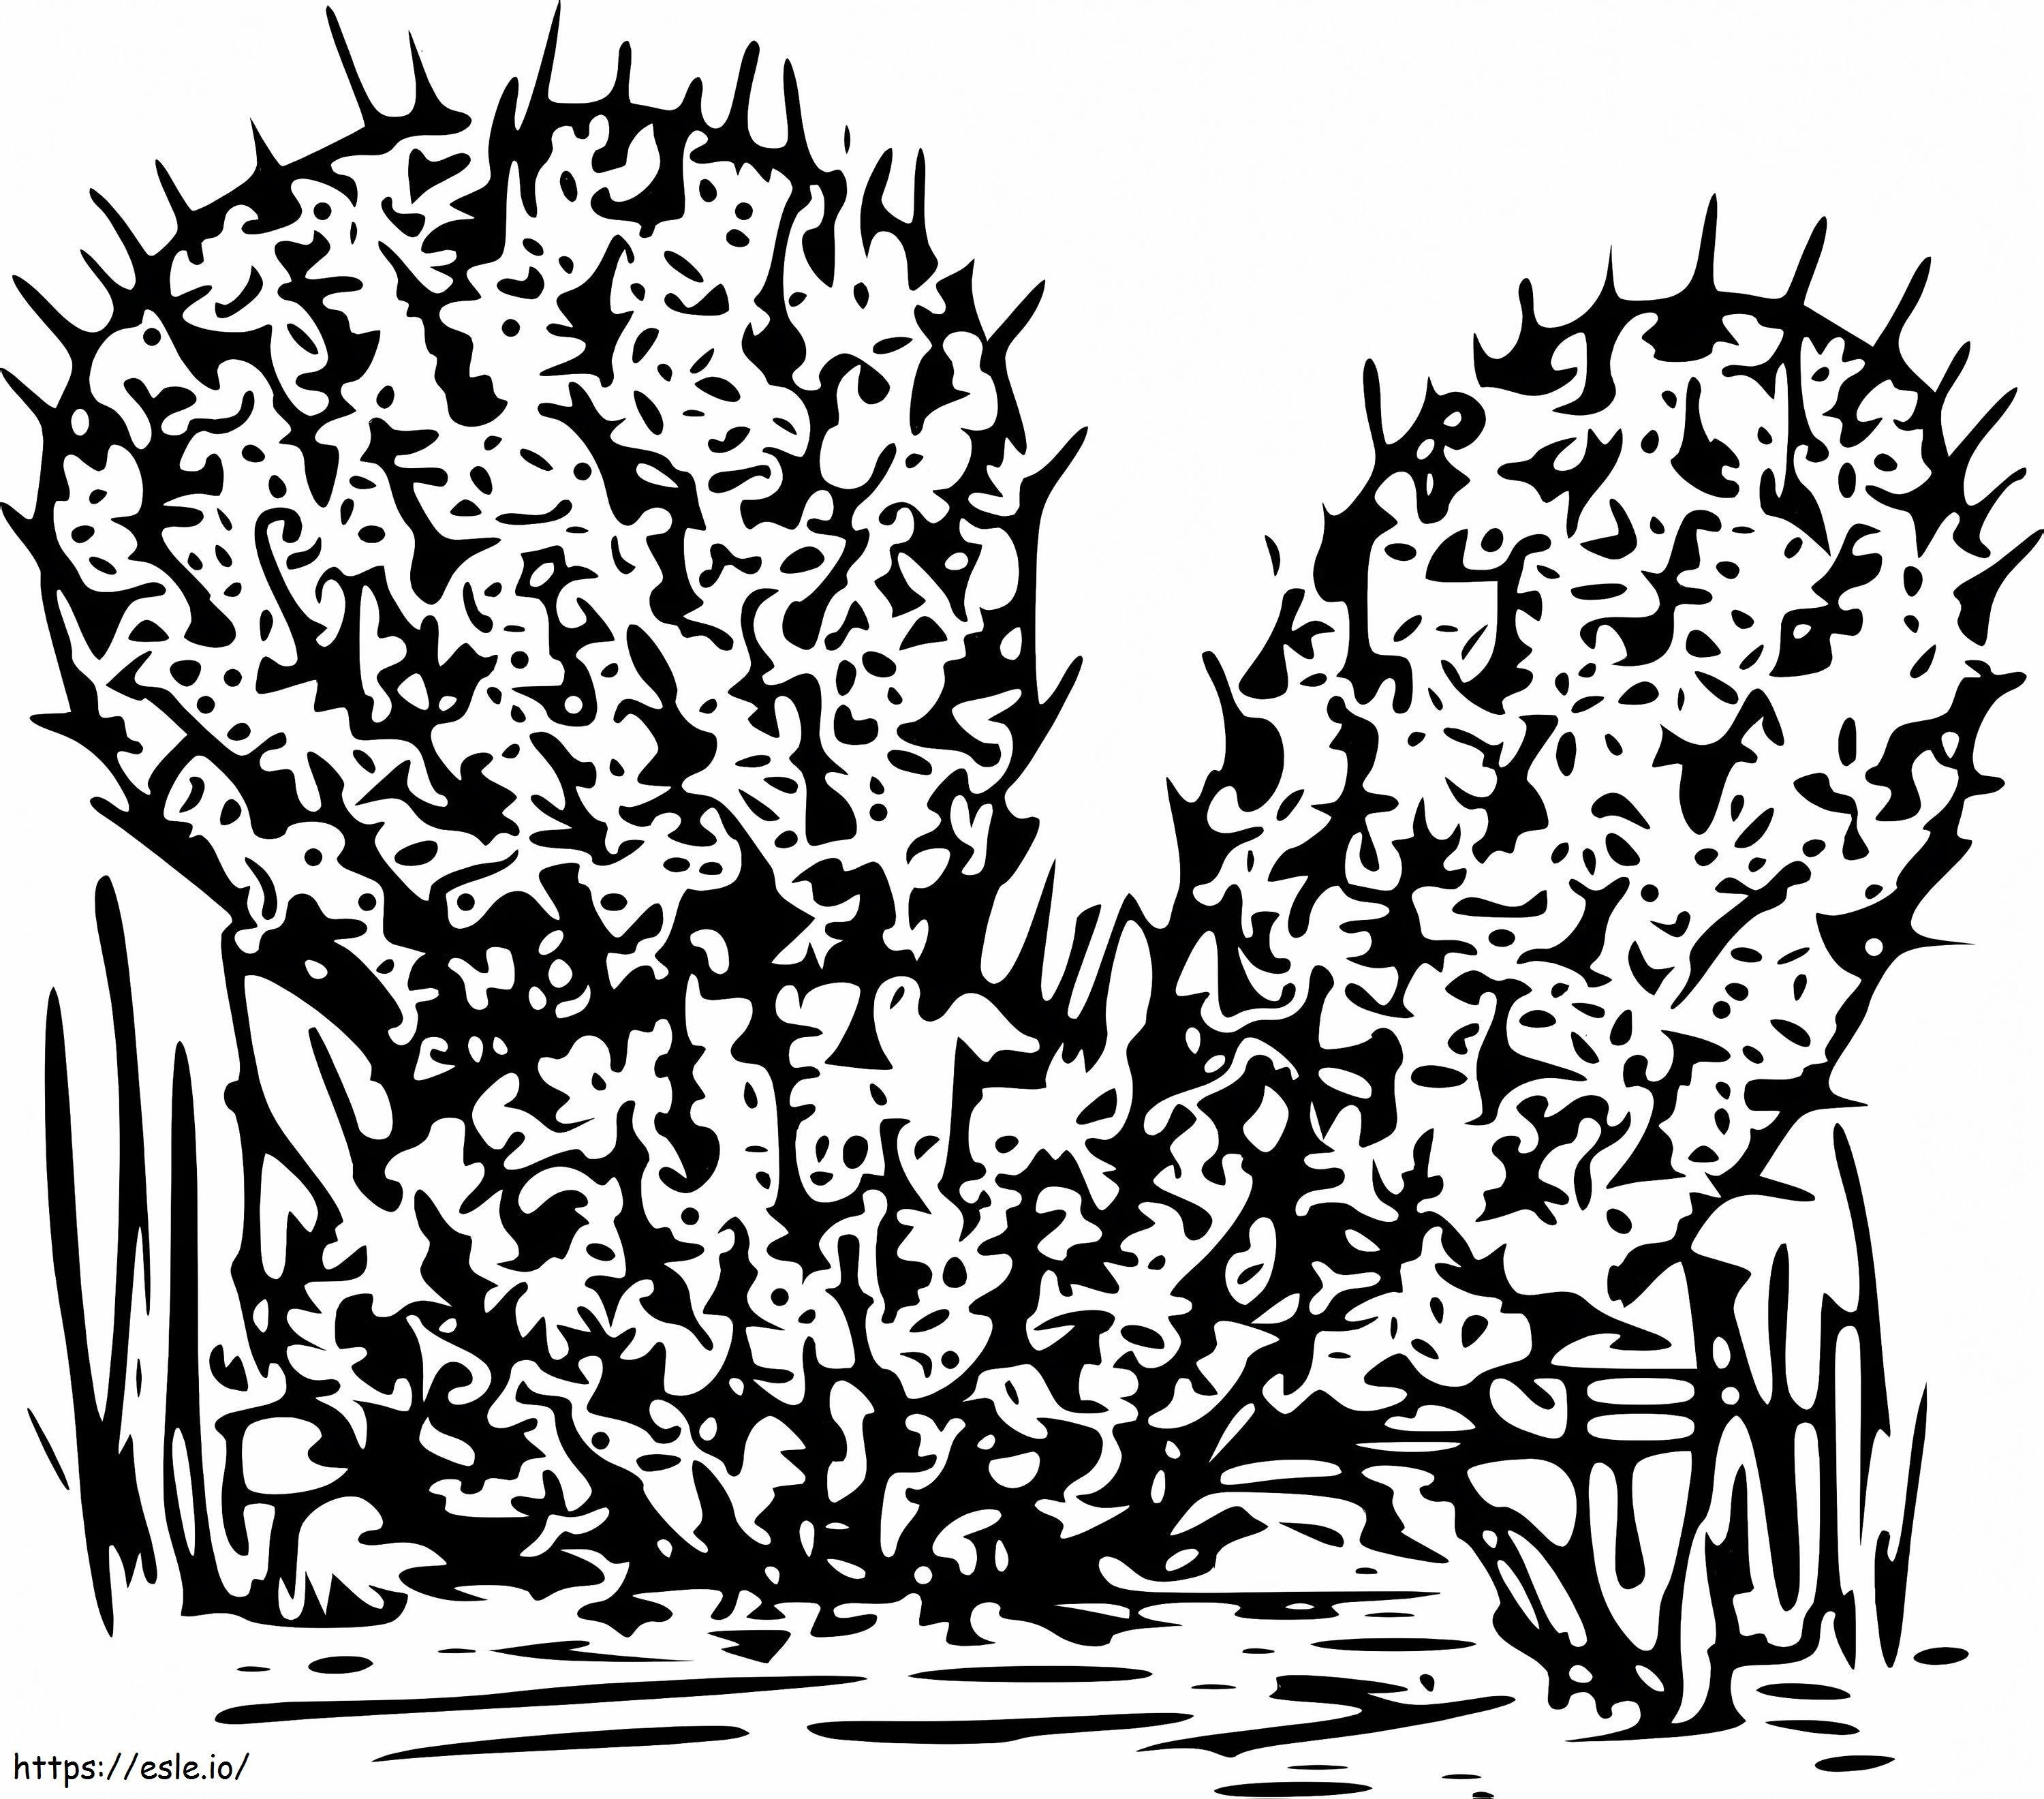 Cactus 1 coloring page